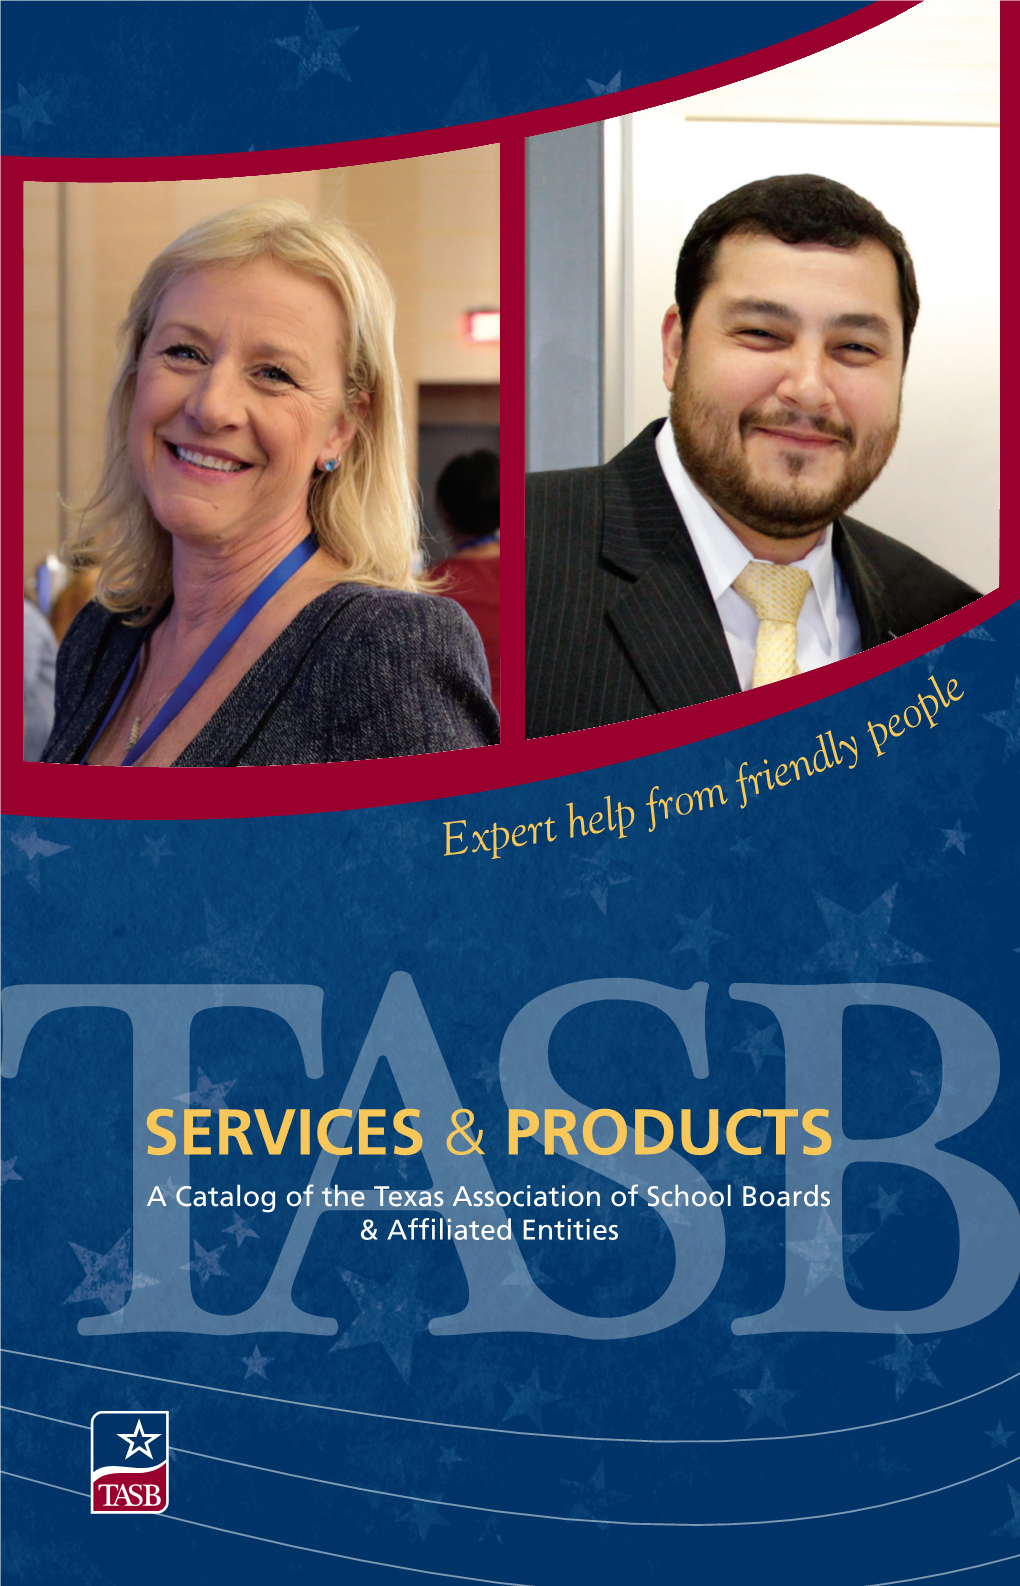 TASB Catalog of Services and Products